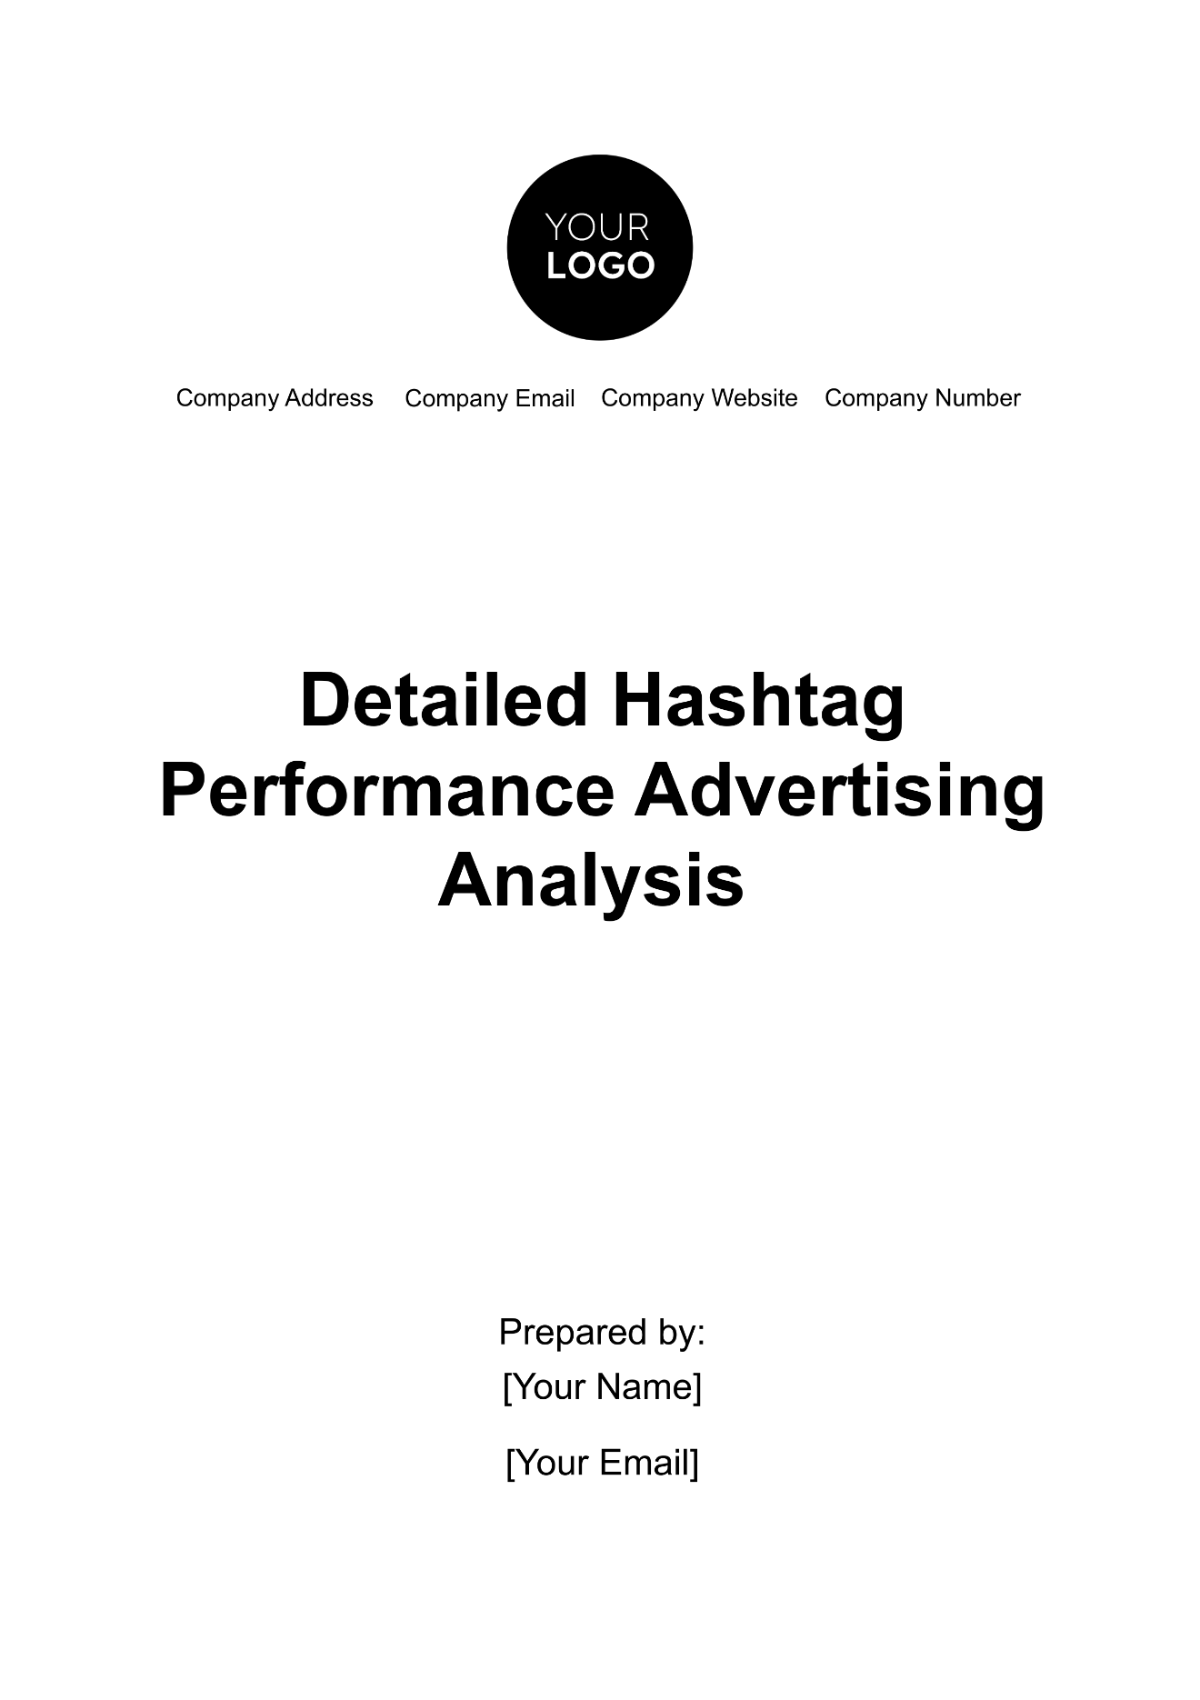 Detailed Hashtag Performance Advertising Analysis Template